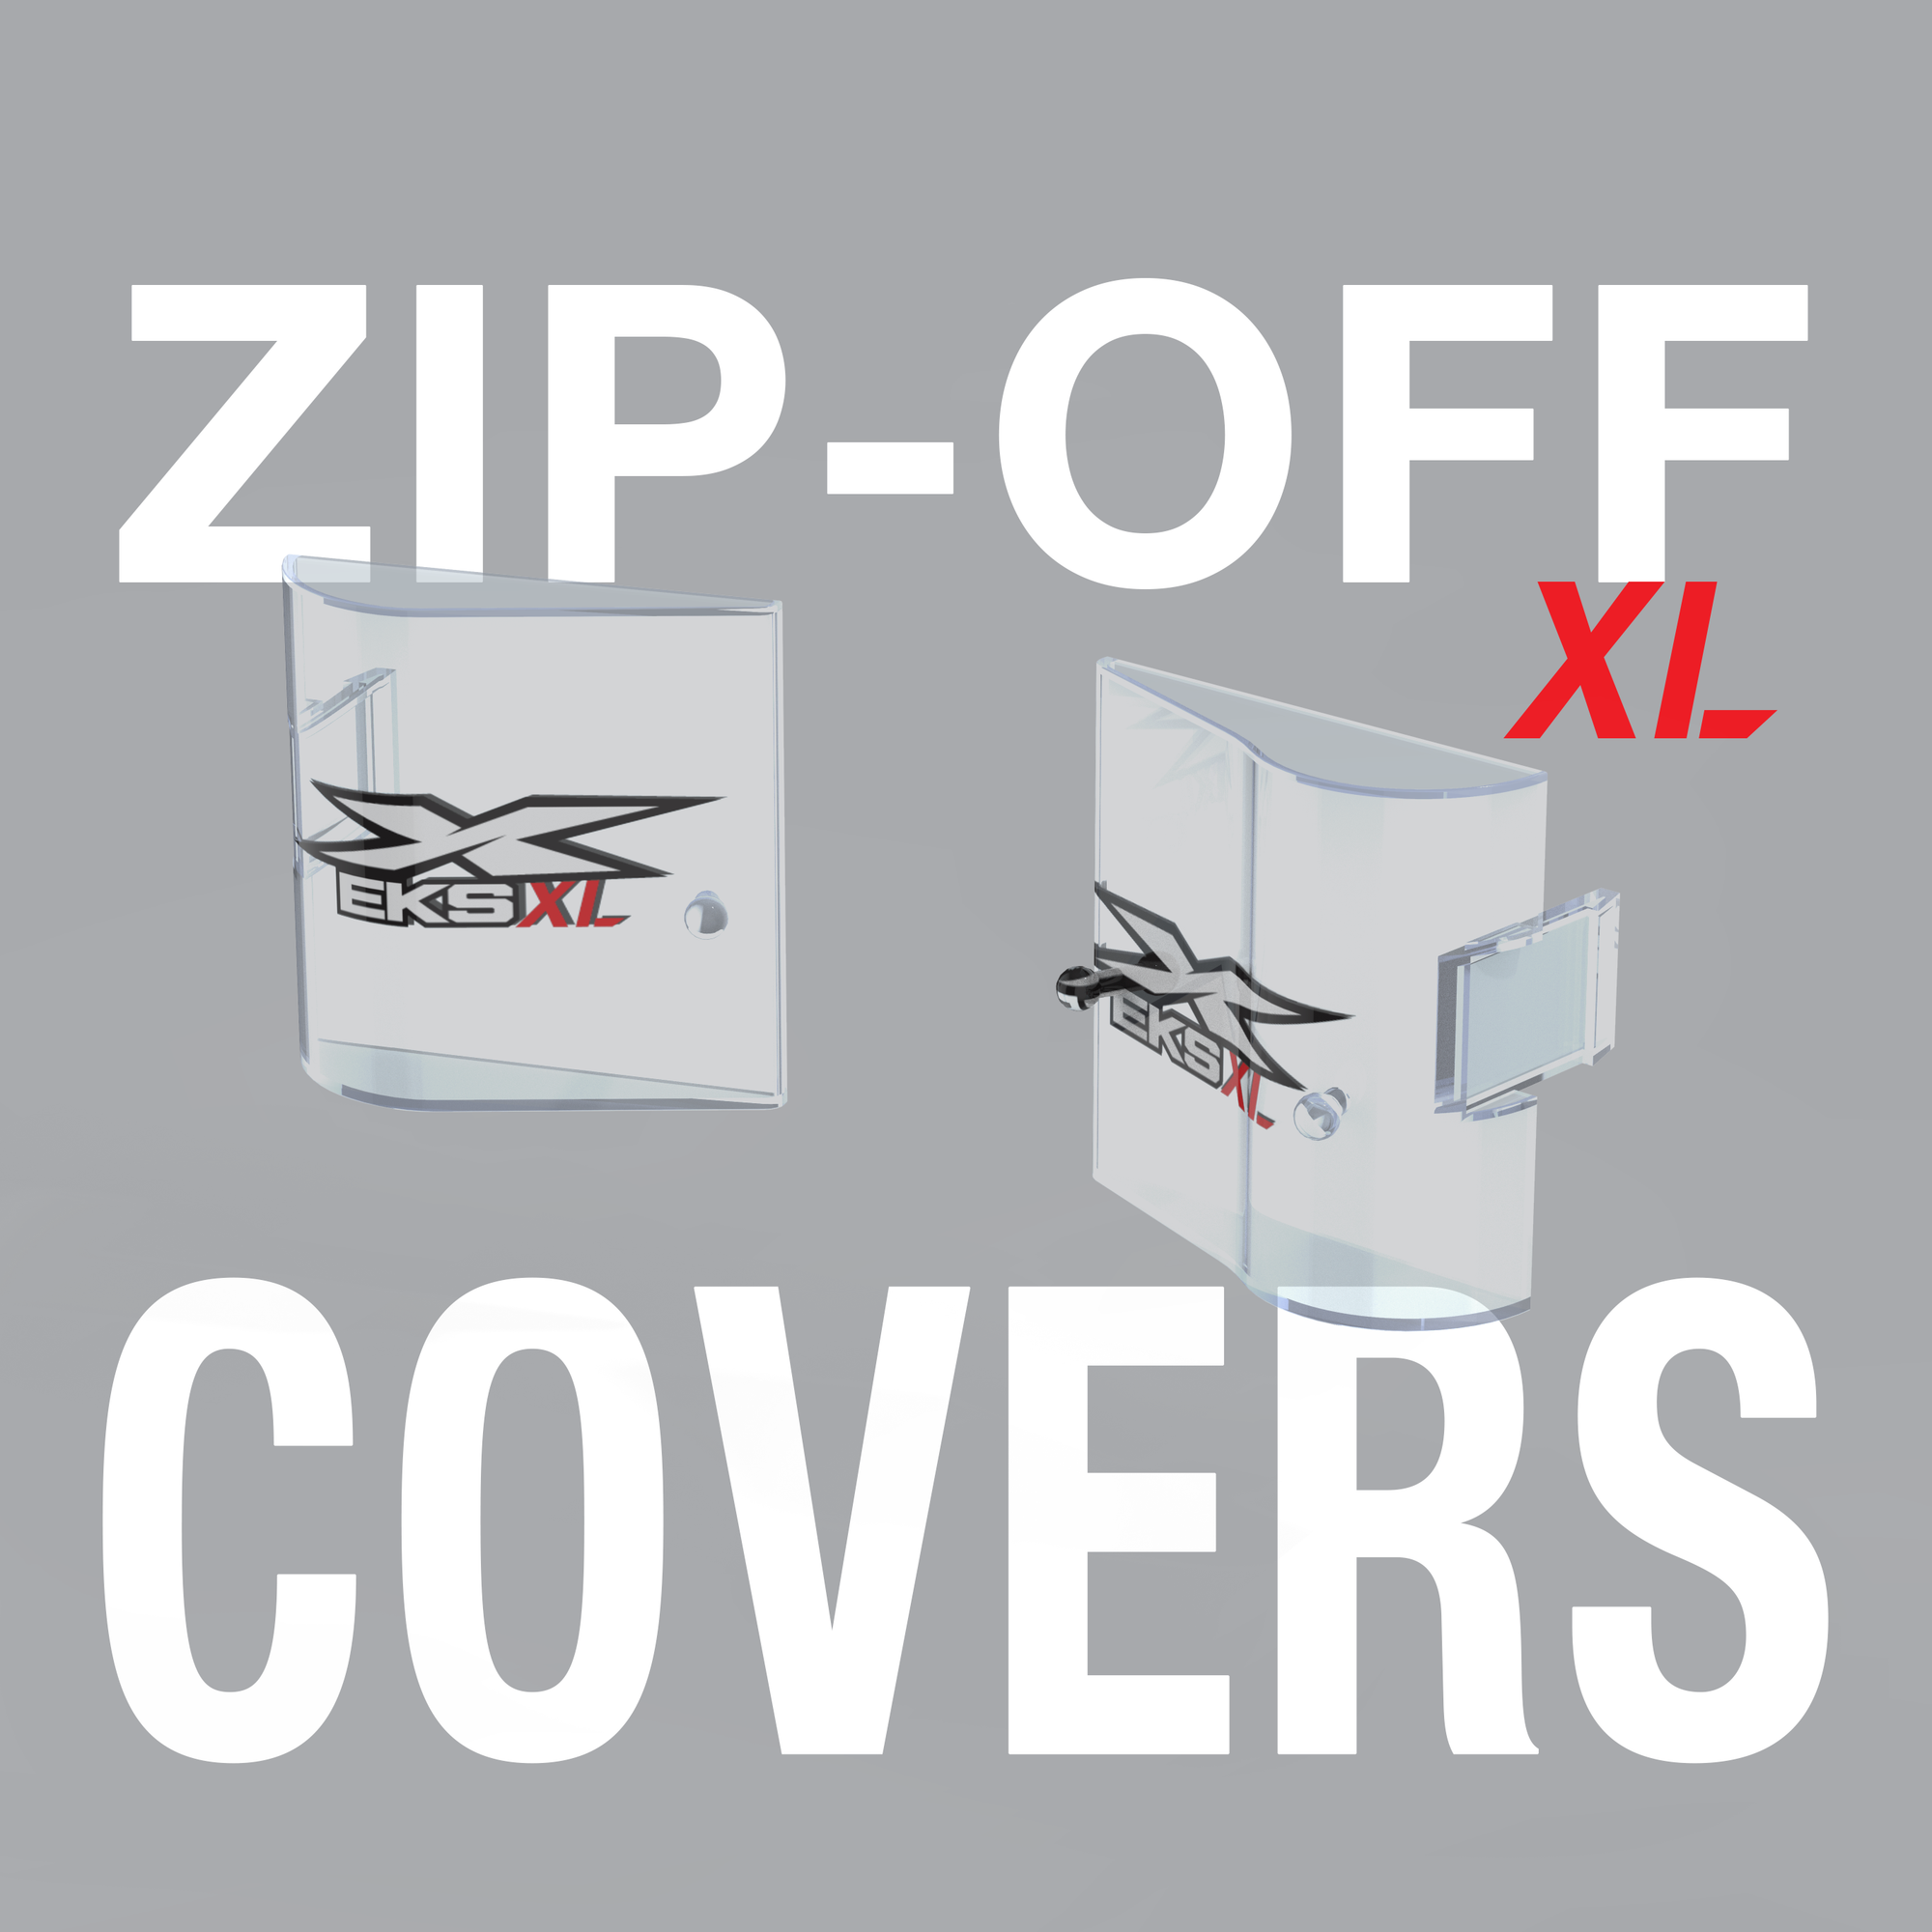 Canister Covers - 1 pair (Zip-Off XL only)